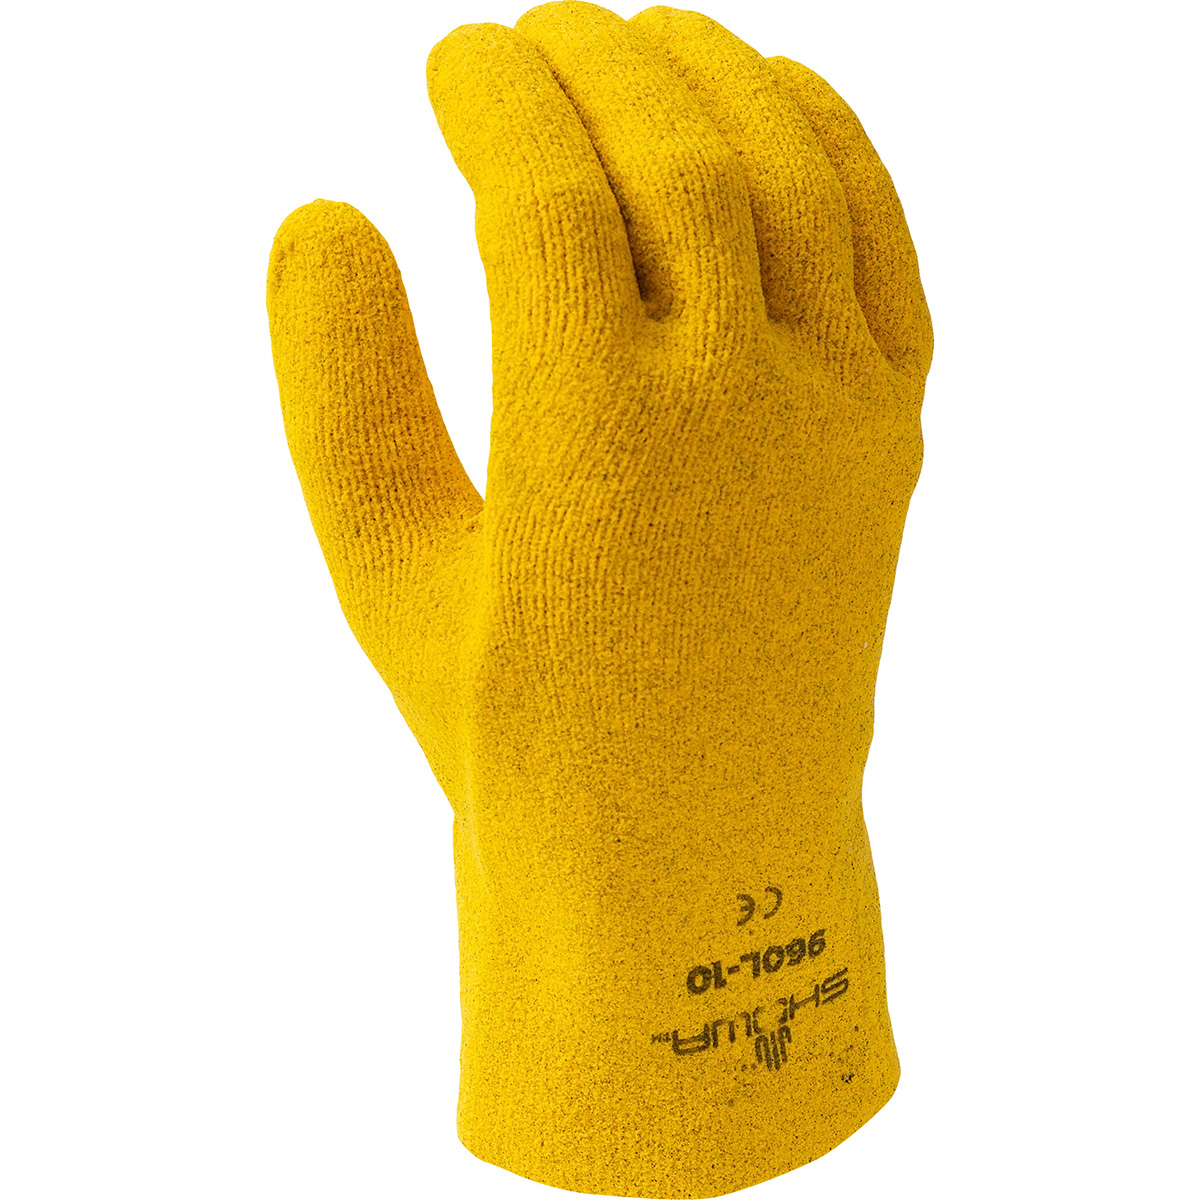 General purpose PVC fully coated, yellow, seam-free liner, slip-on, large